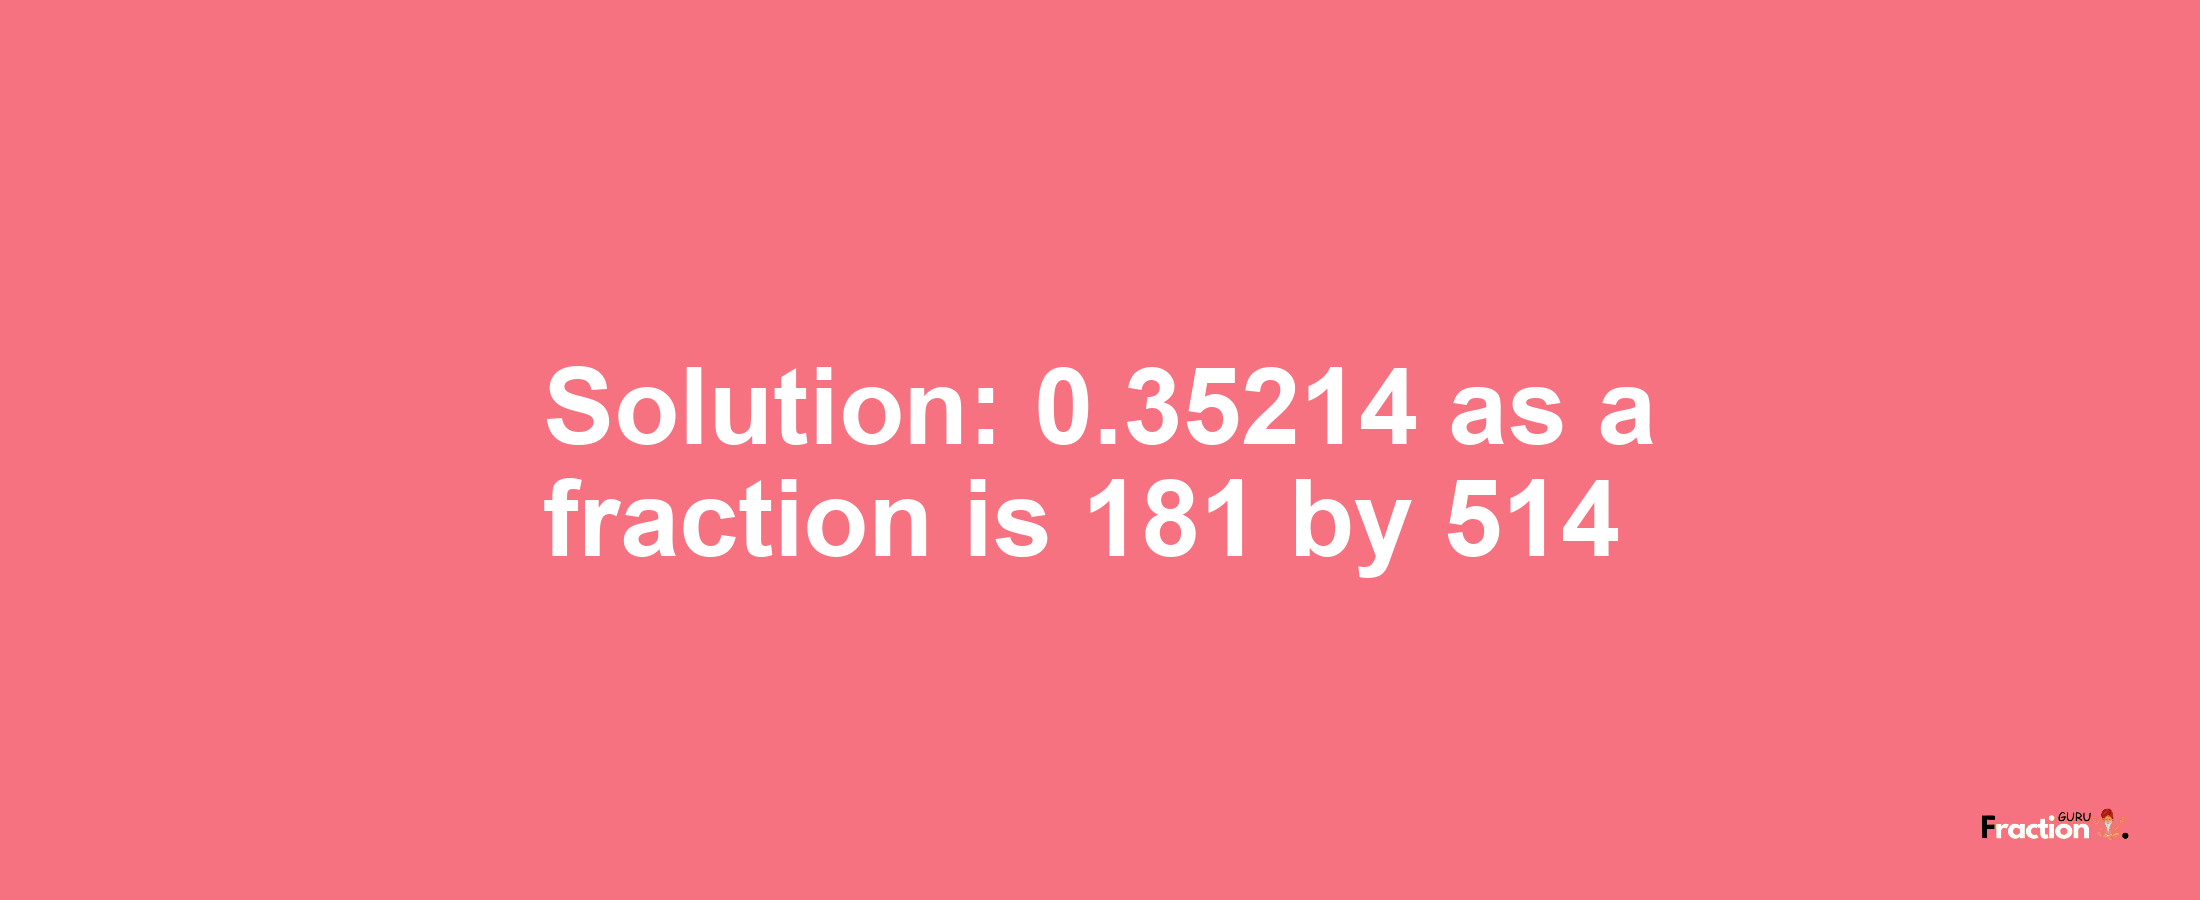 Solution:0.35214 as a fraction is 181/514